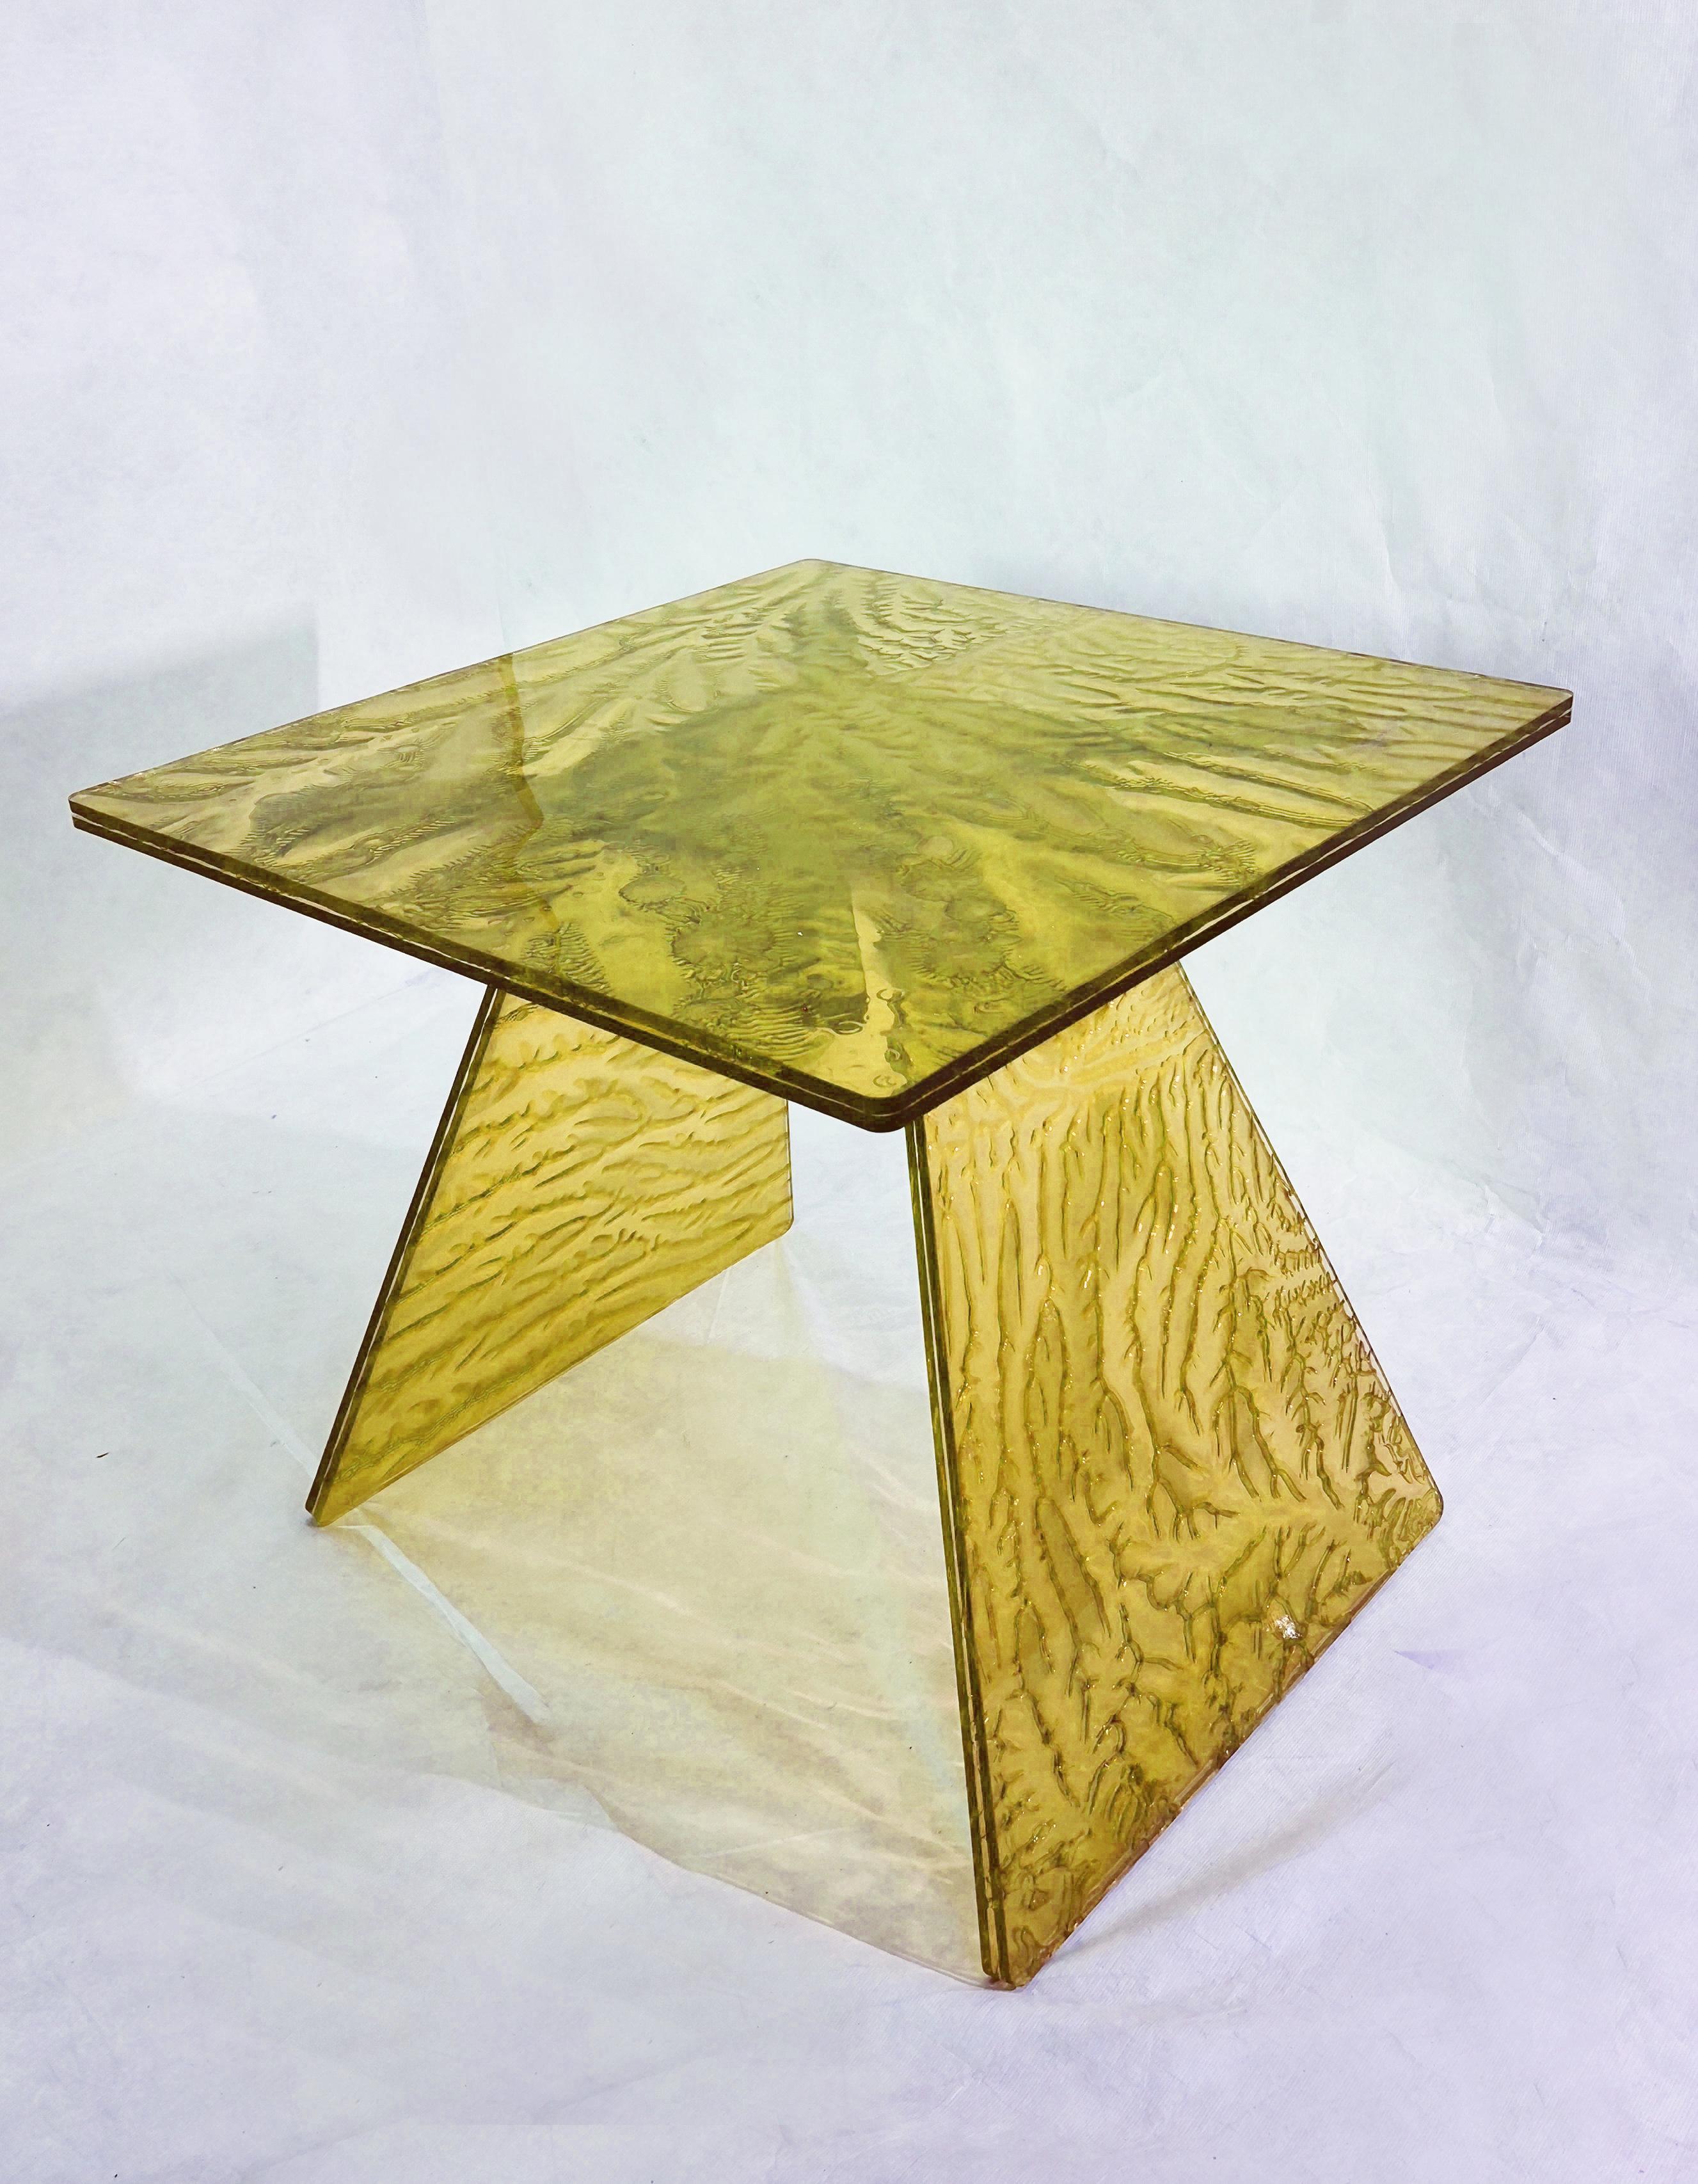 Coffee table, handmade in transparent acrylic colored with an innovative technology.
The material is made through the fusion of three plates, one of which
Partially cured center.
This process creates unique and particular effects,